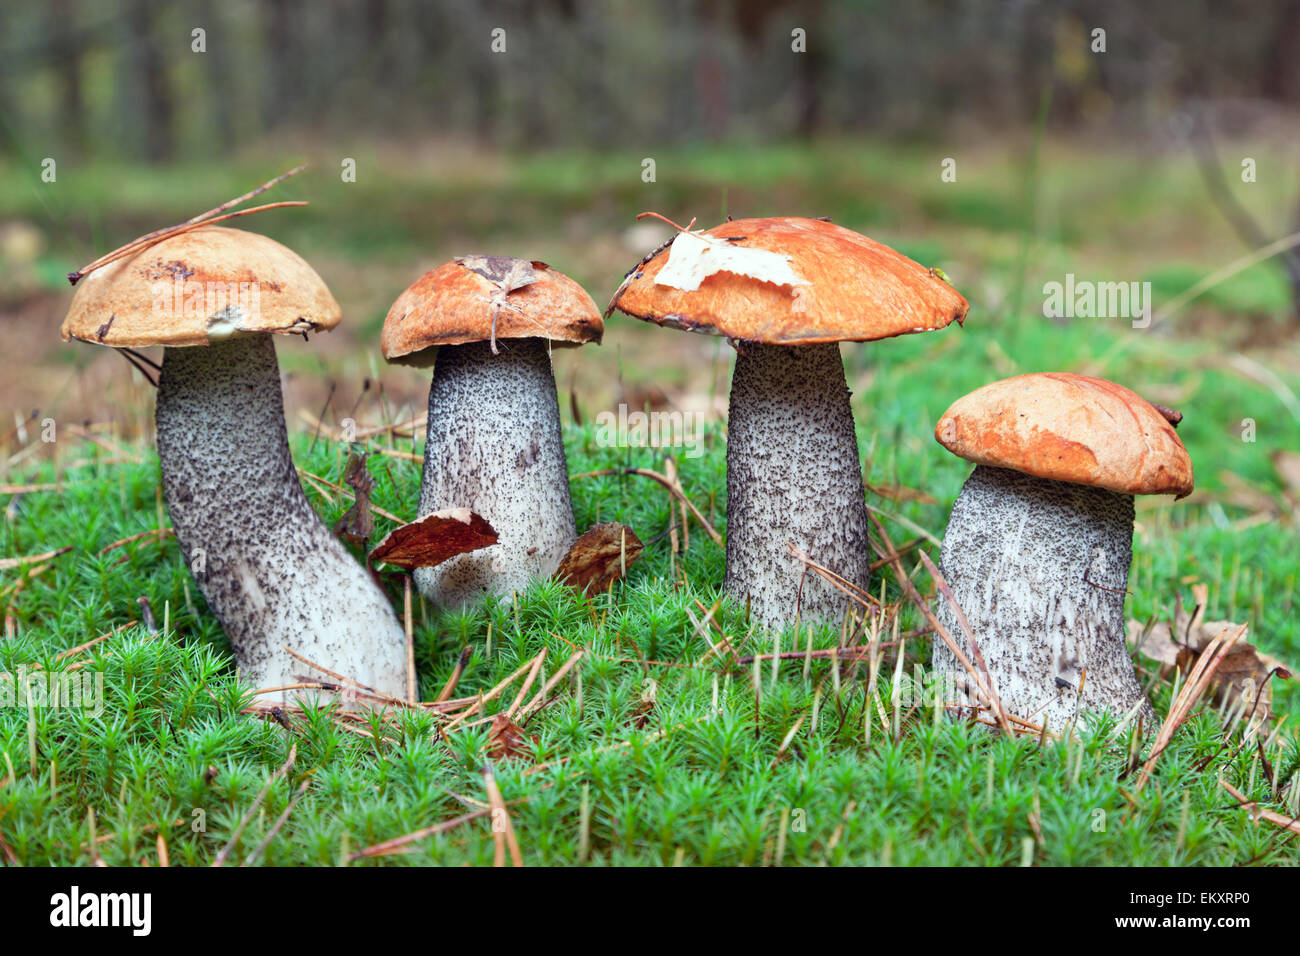 edible mushrooms in forest Stock Photo